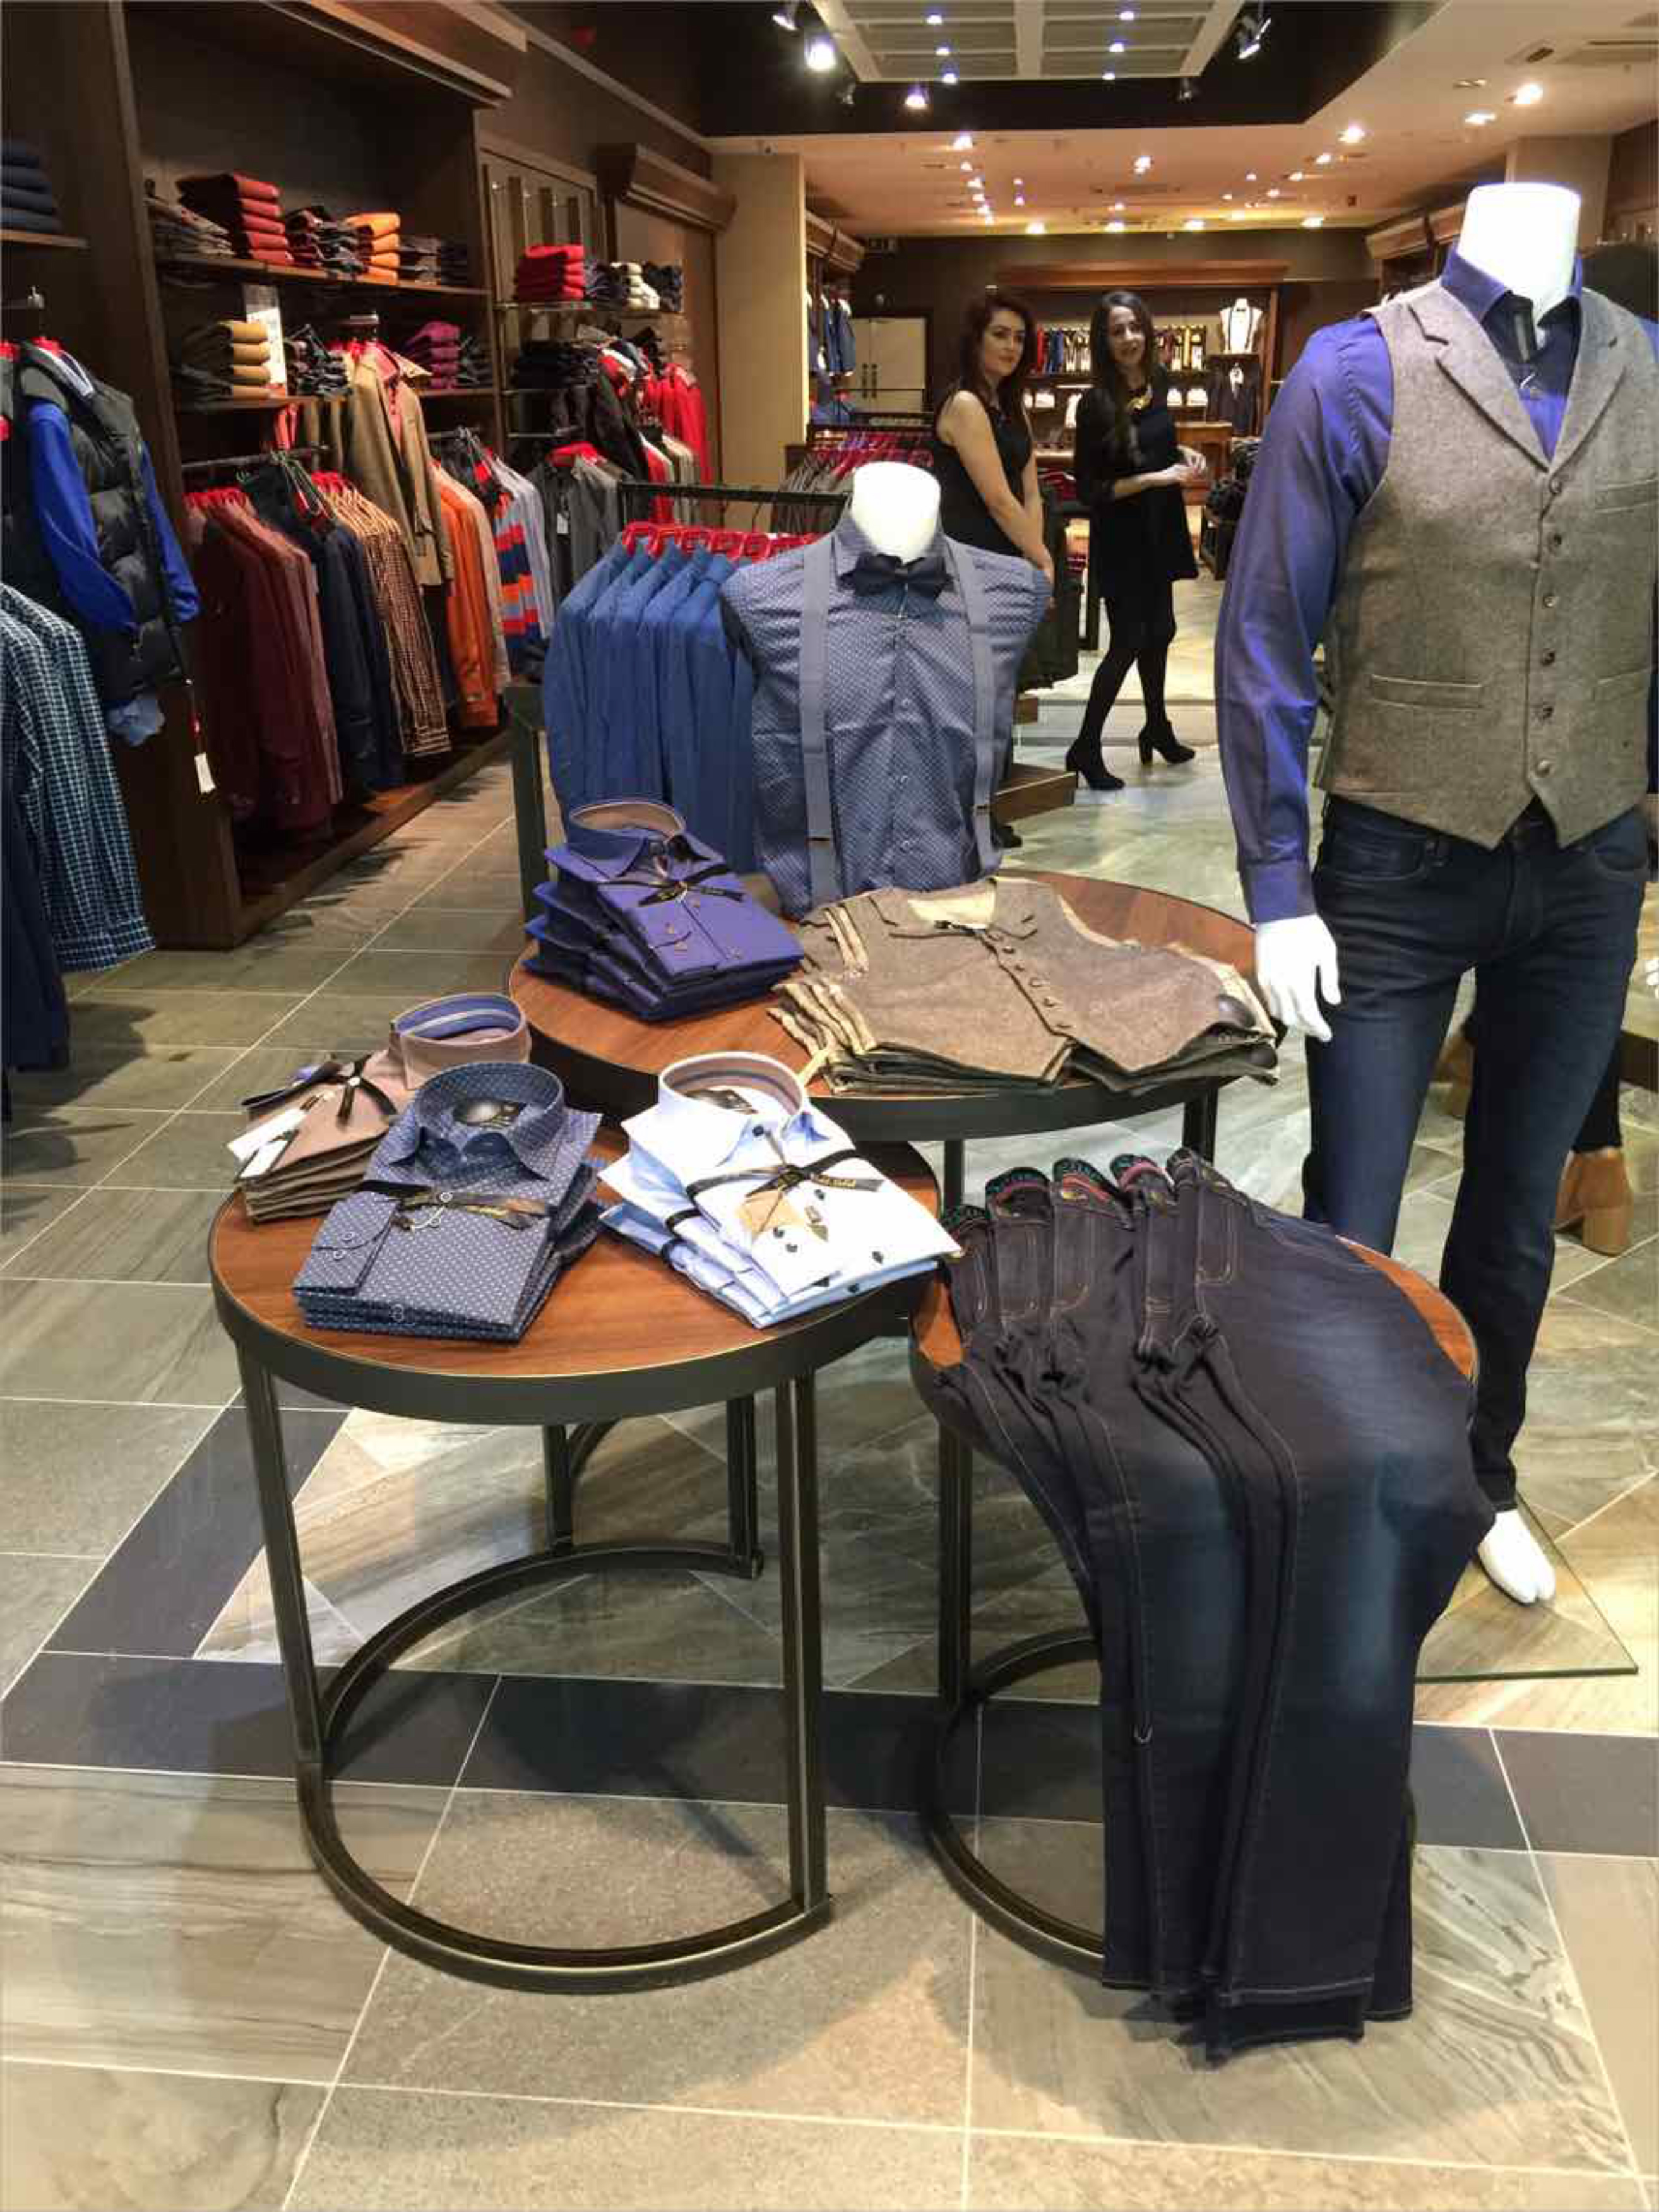 Display tables showing shirts and jeans menswear